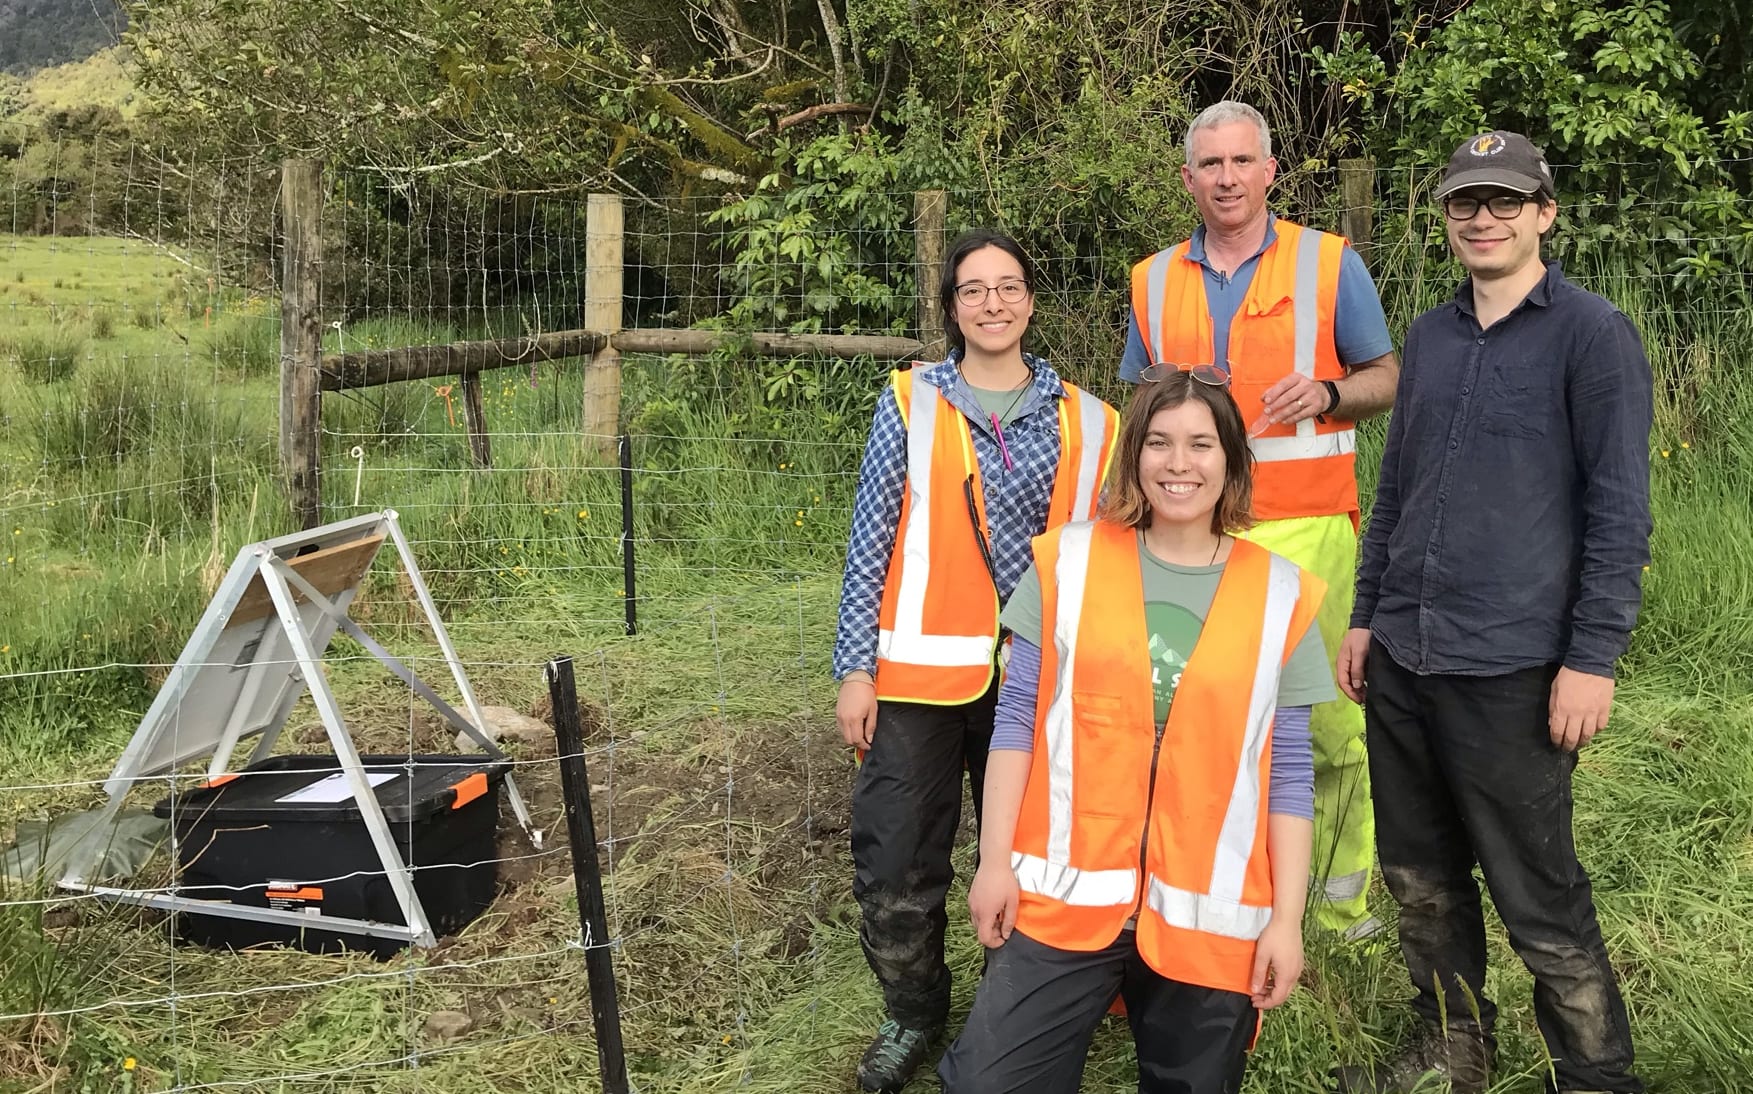 The completed installation with team (L-R): Olivia Pita Sllim, Ash Matheson, Prof John Townend and Dr. Finn Illsley-Kemp.